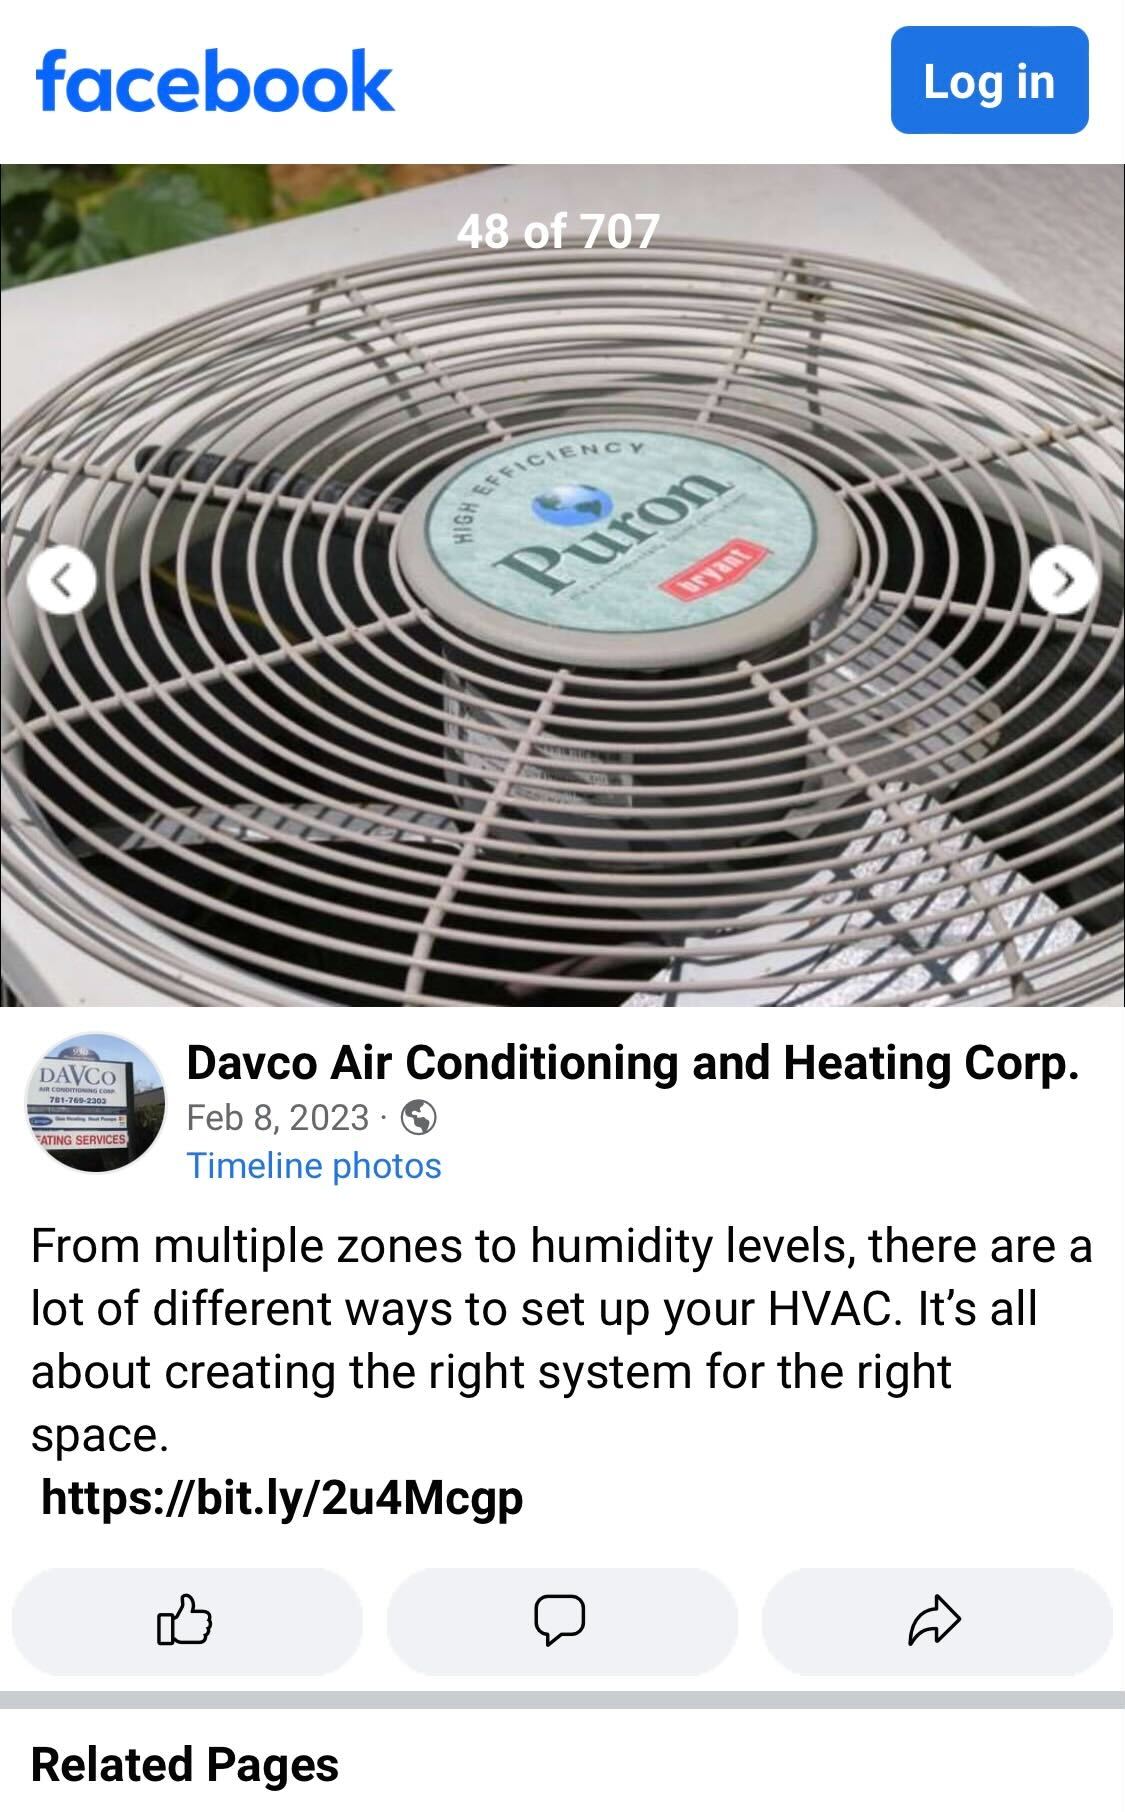 Image of an HVAC company's Facebook post